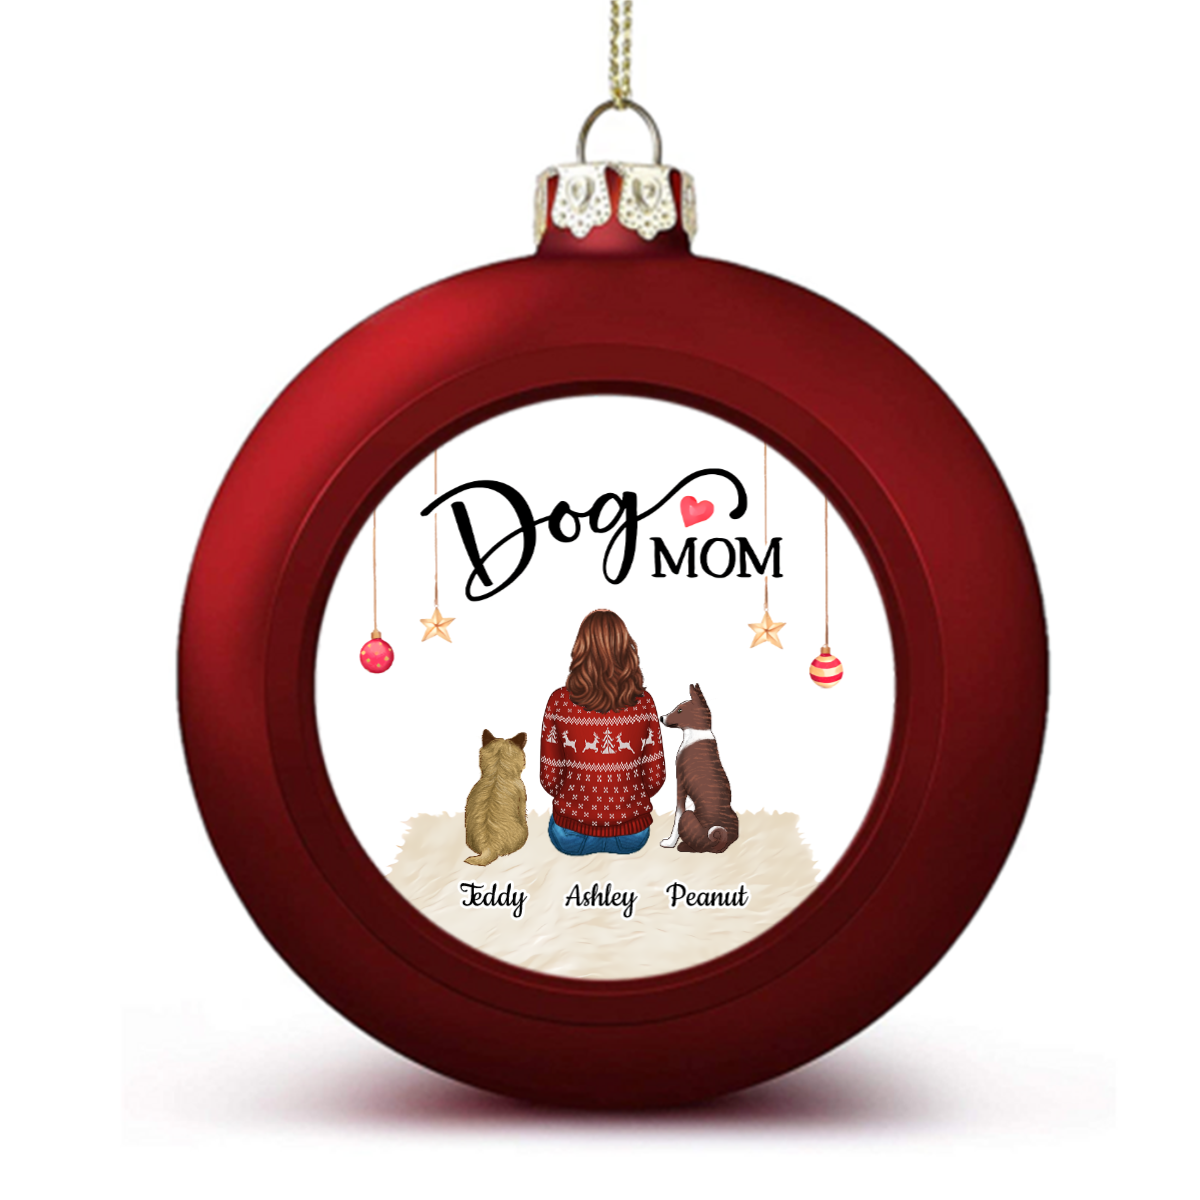 Dog Mom Sitting Personalized Ball Ornaments